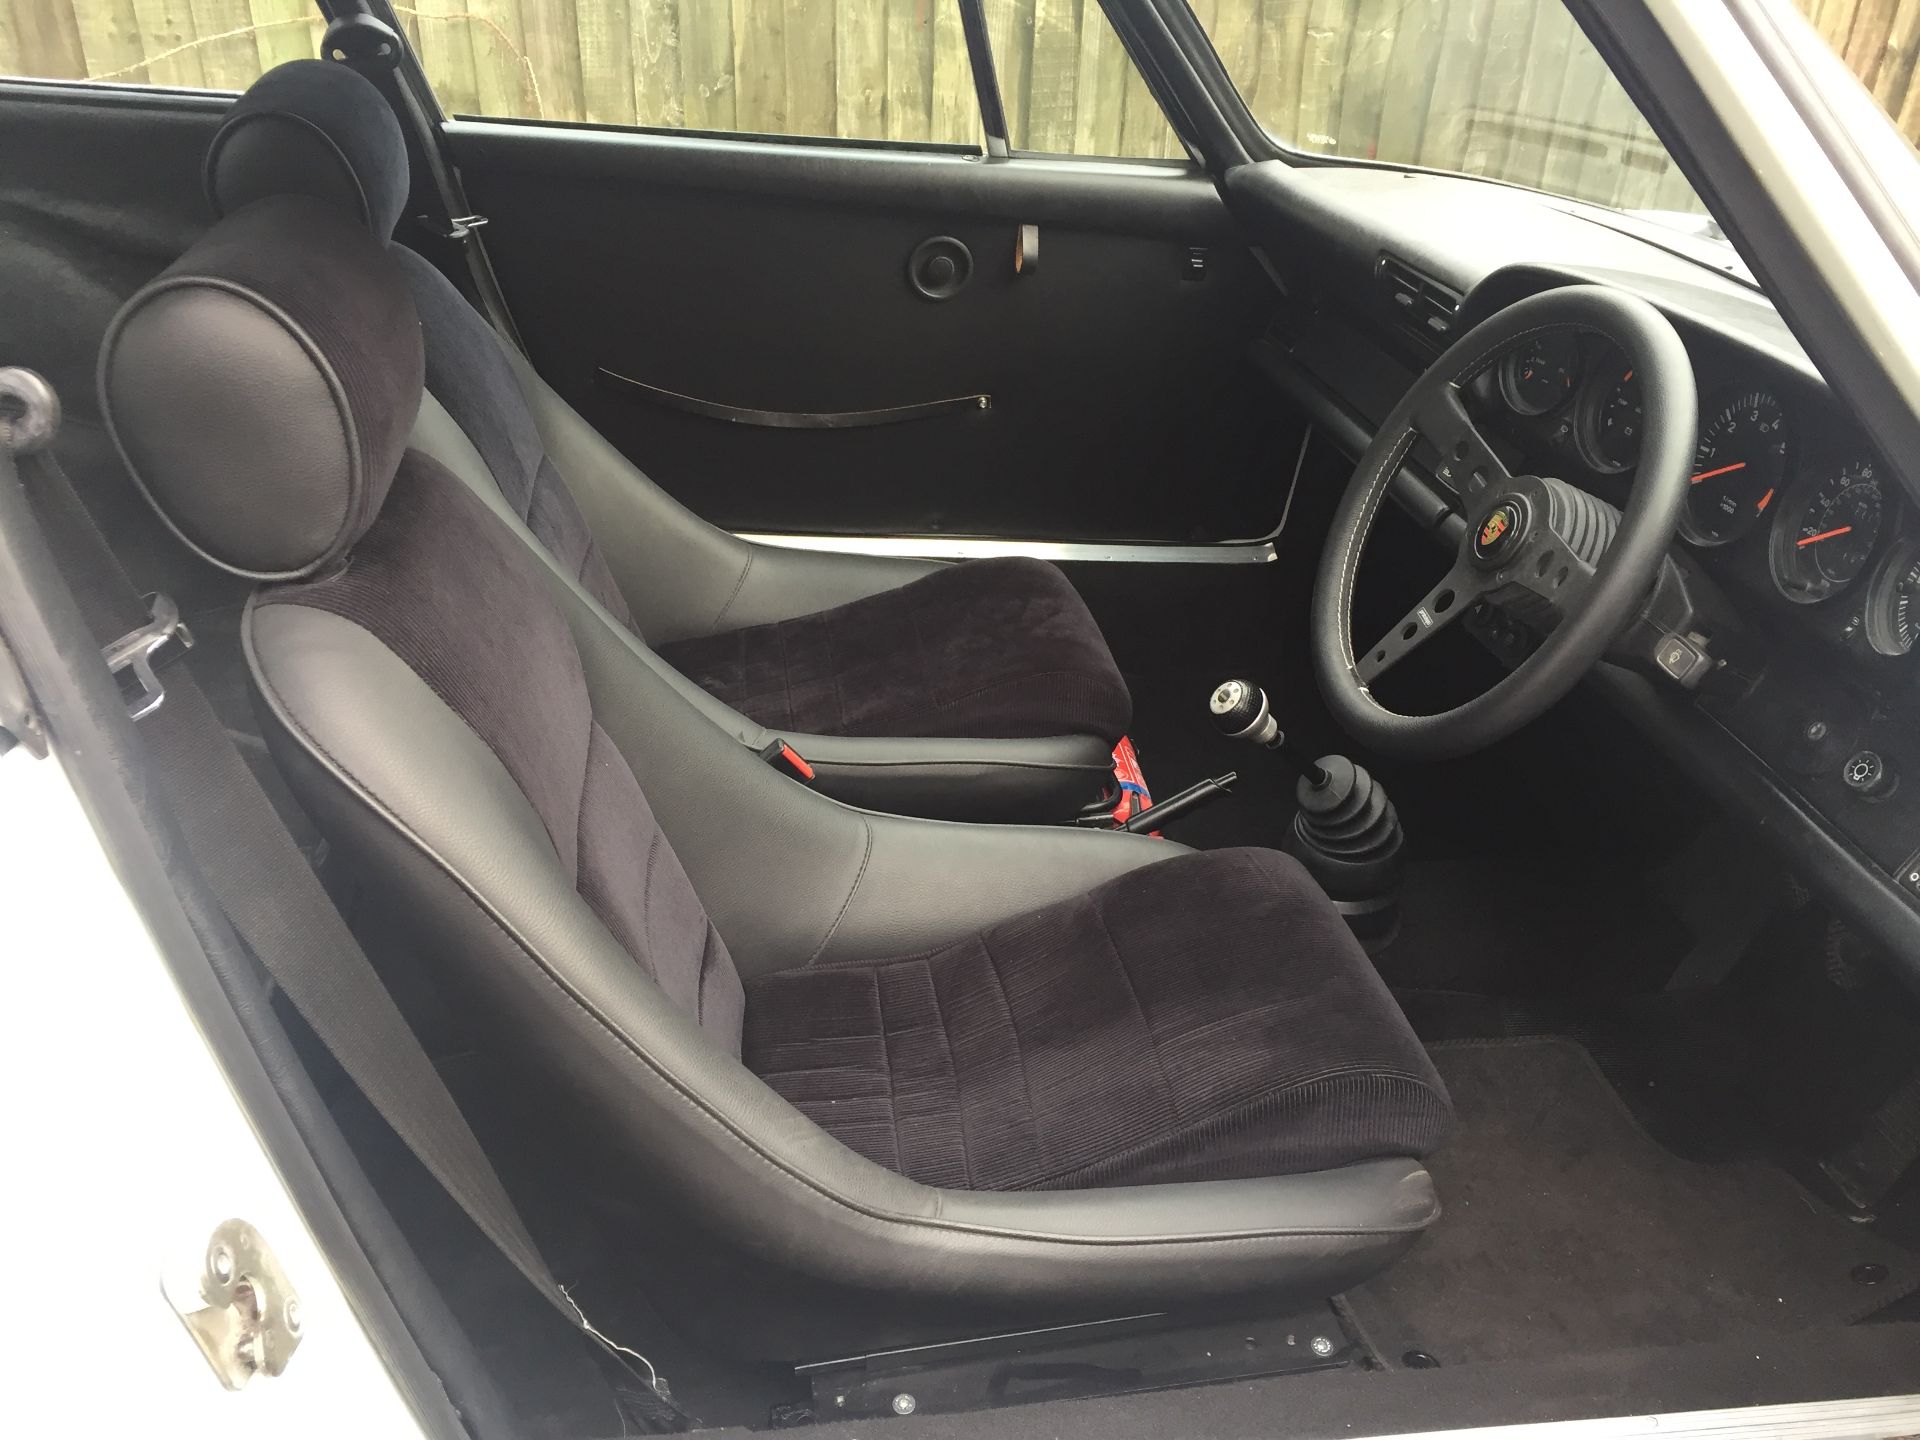 Porsche 911 Carrera 2.7 Rs Recreation - Pro 9 Build Based On A 1986 Porsche 911 **Reserve reduced** - Image 14 of 21